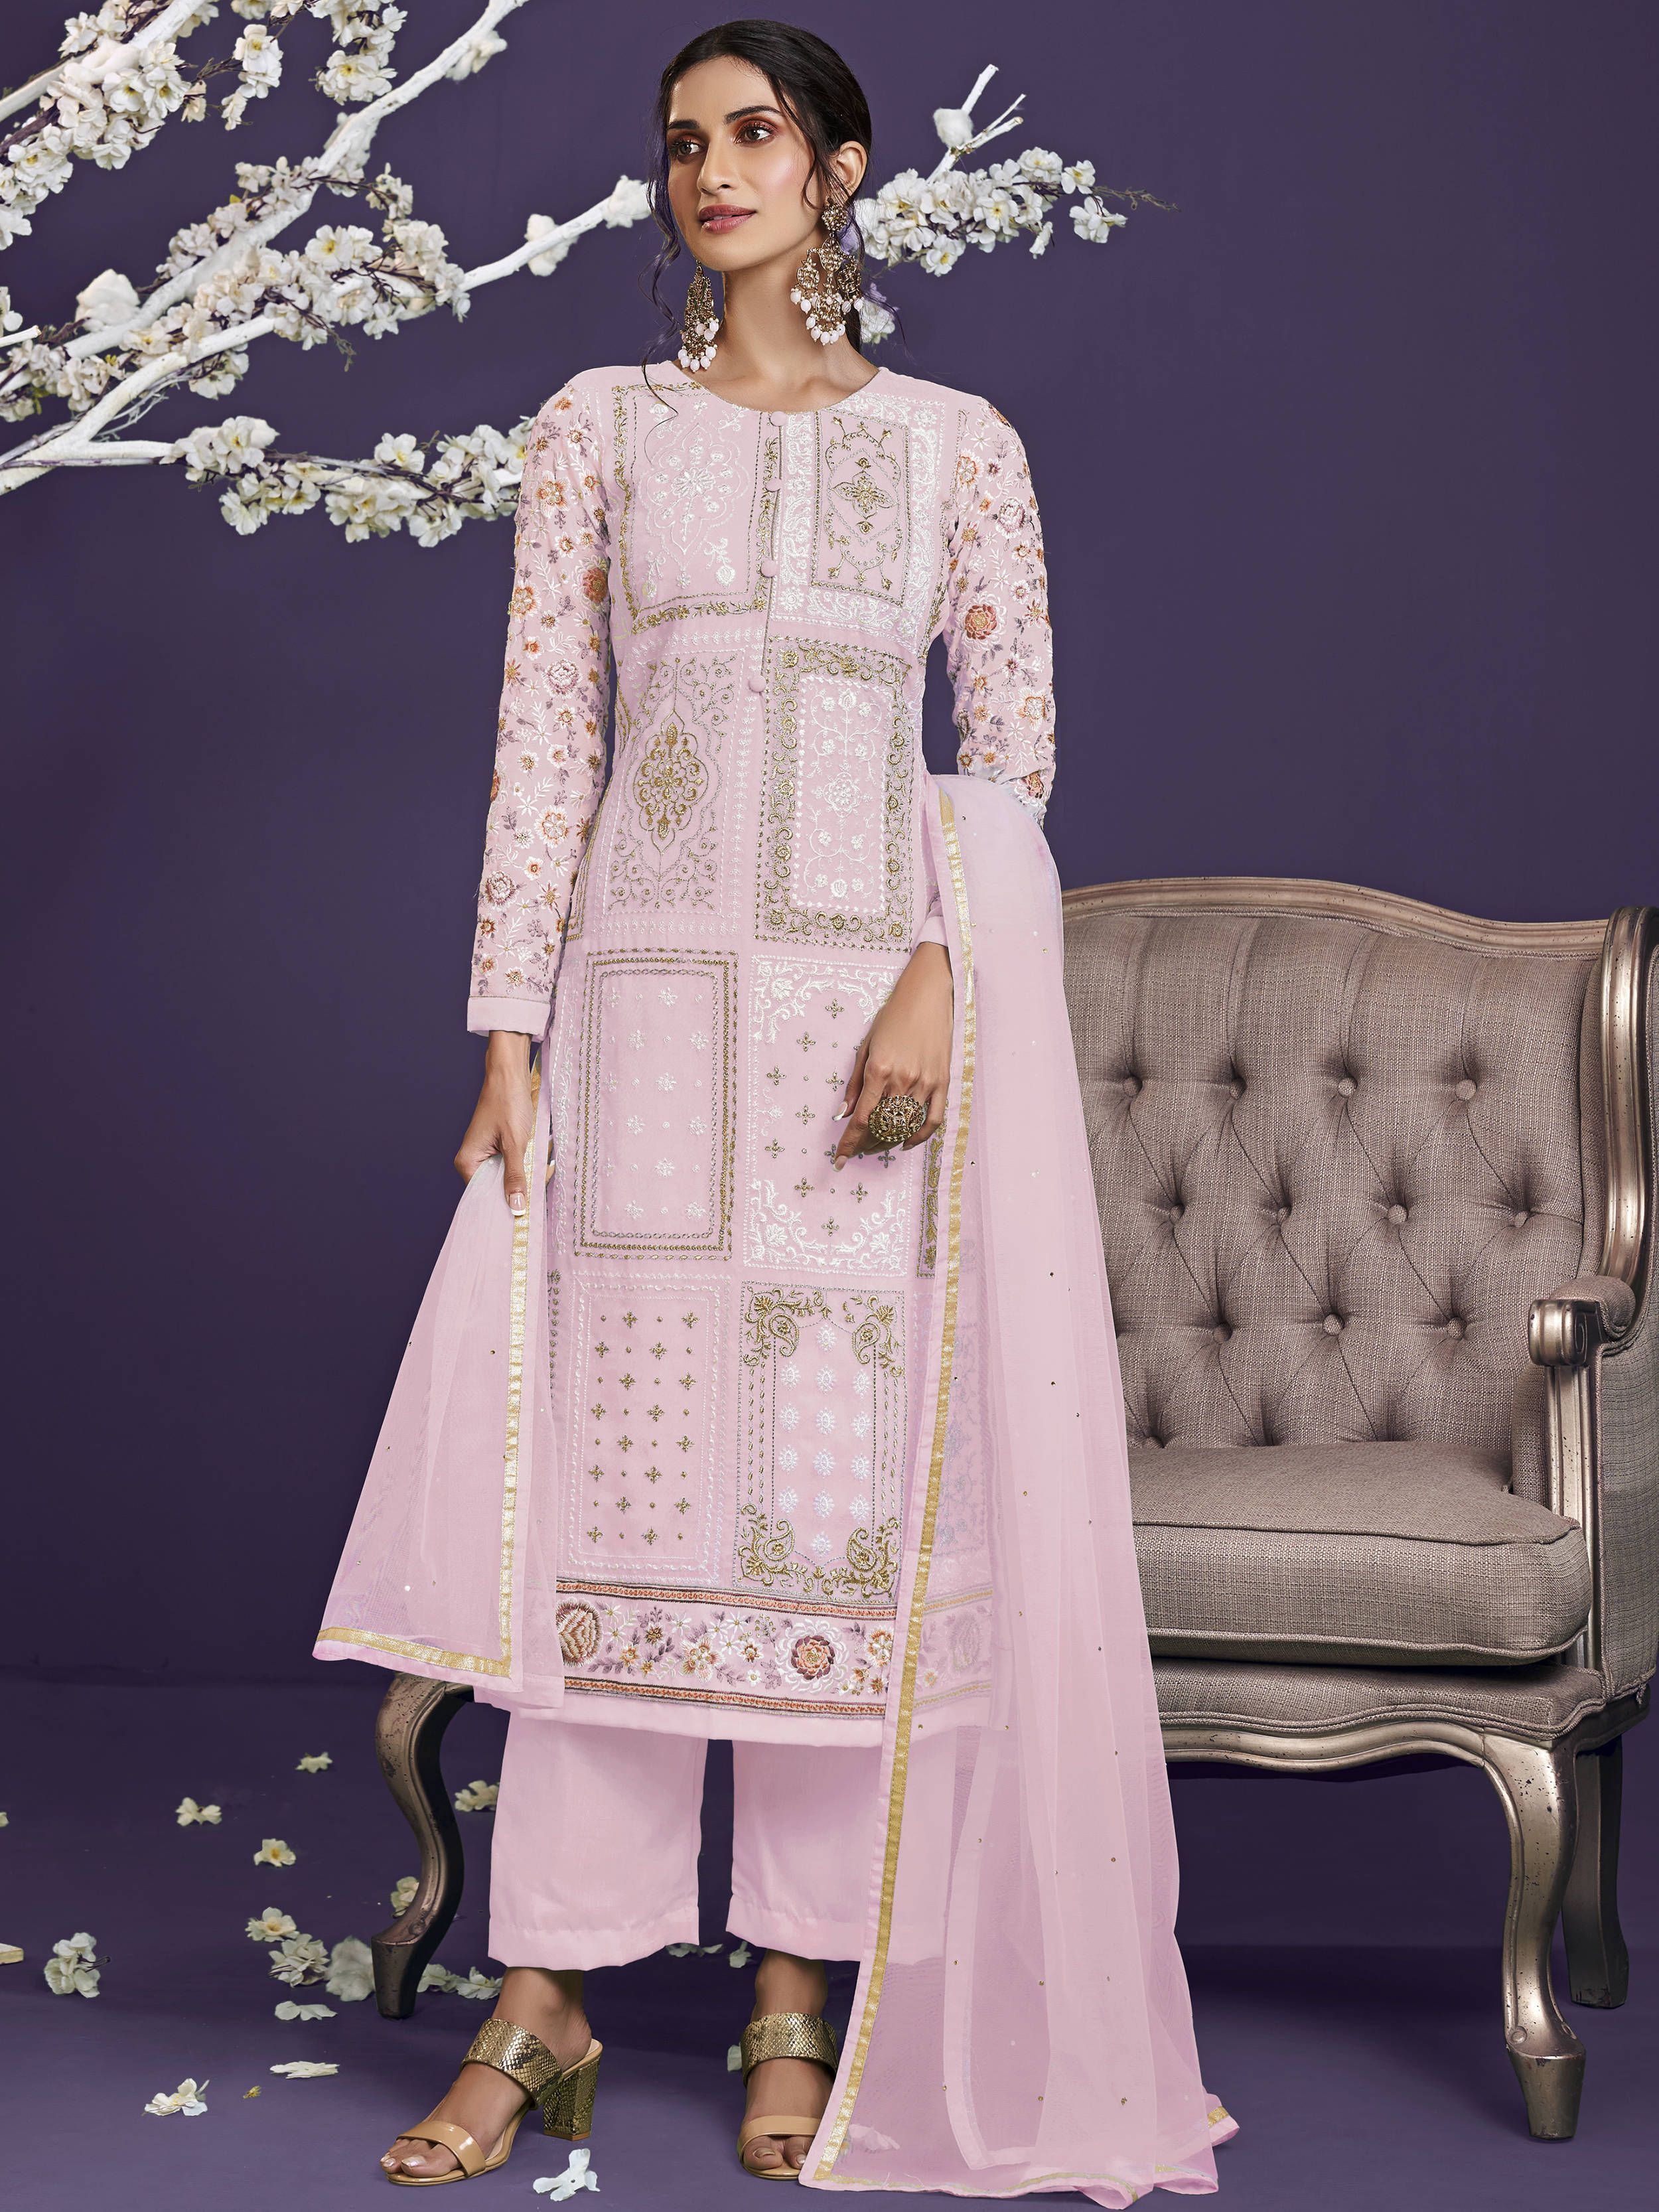 Stunning Light Pink Floral Embroidery Party Wear Salwar Suit